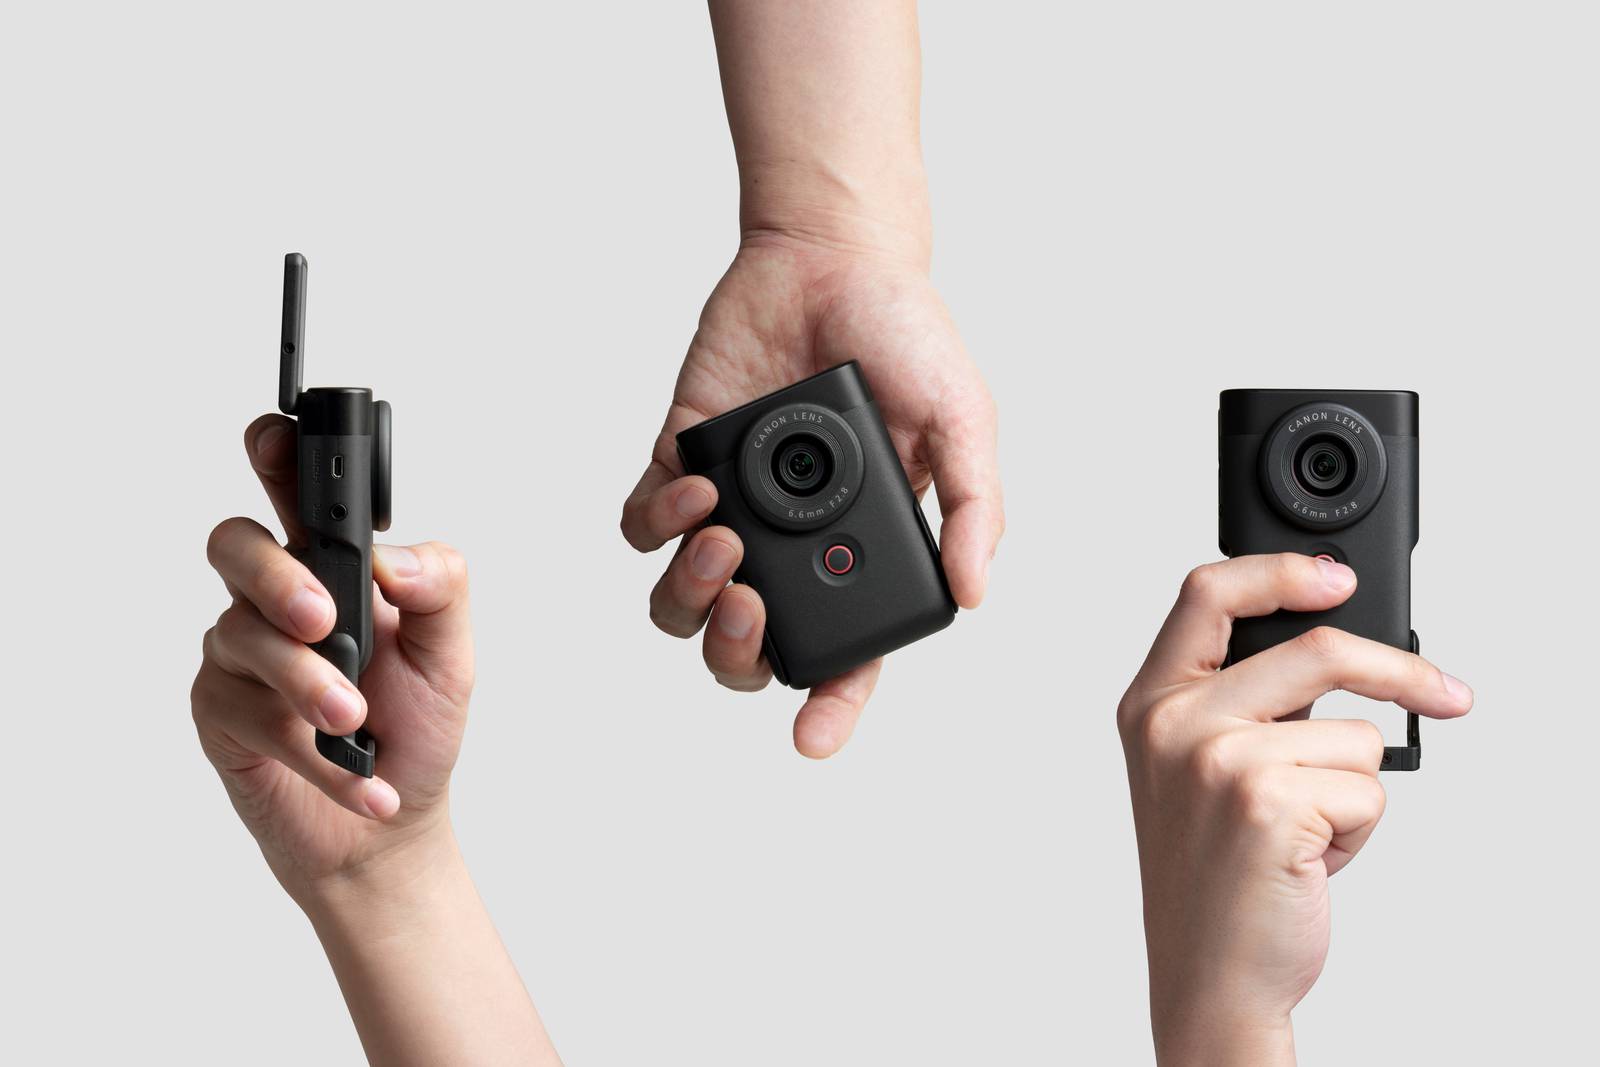 Compact camera held in one hand to demonstrate its size.